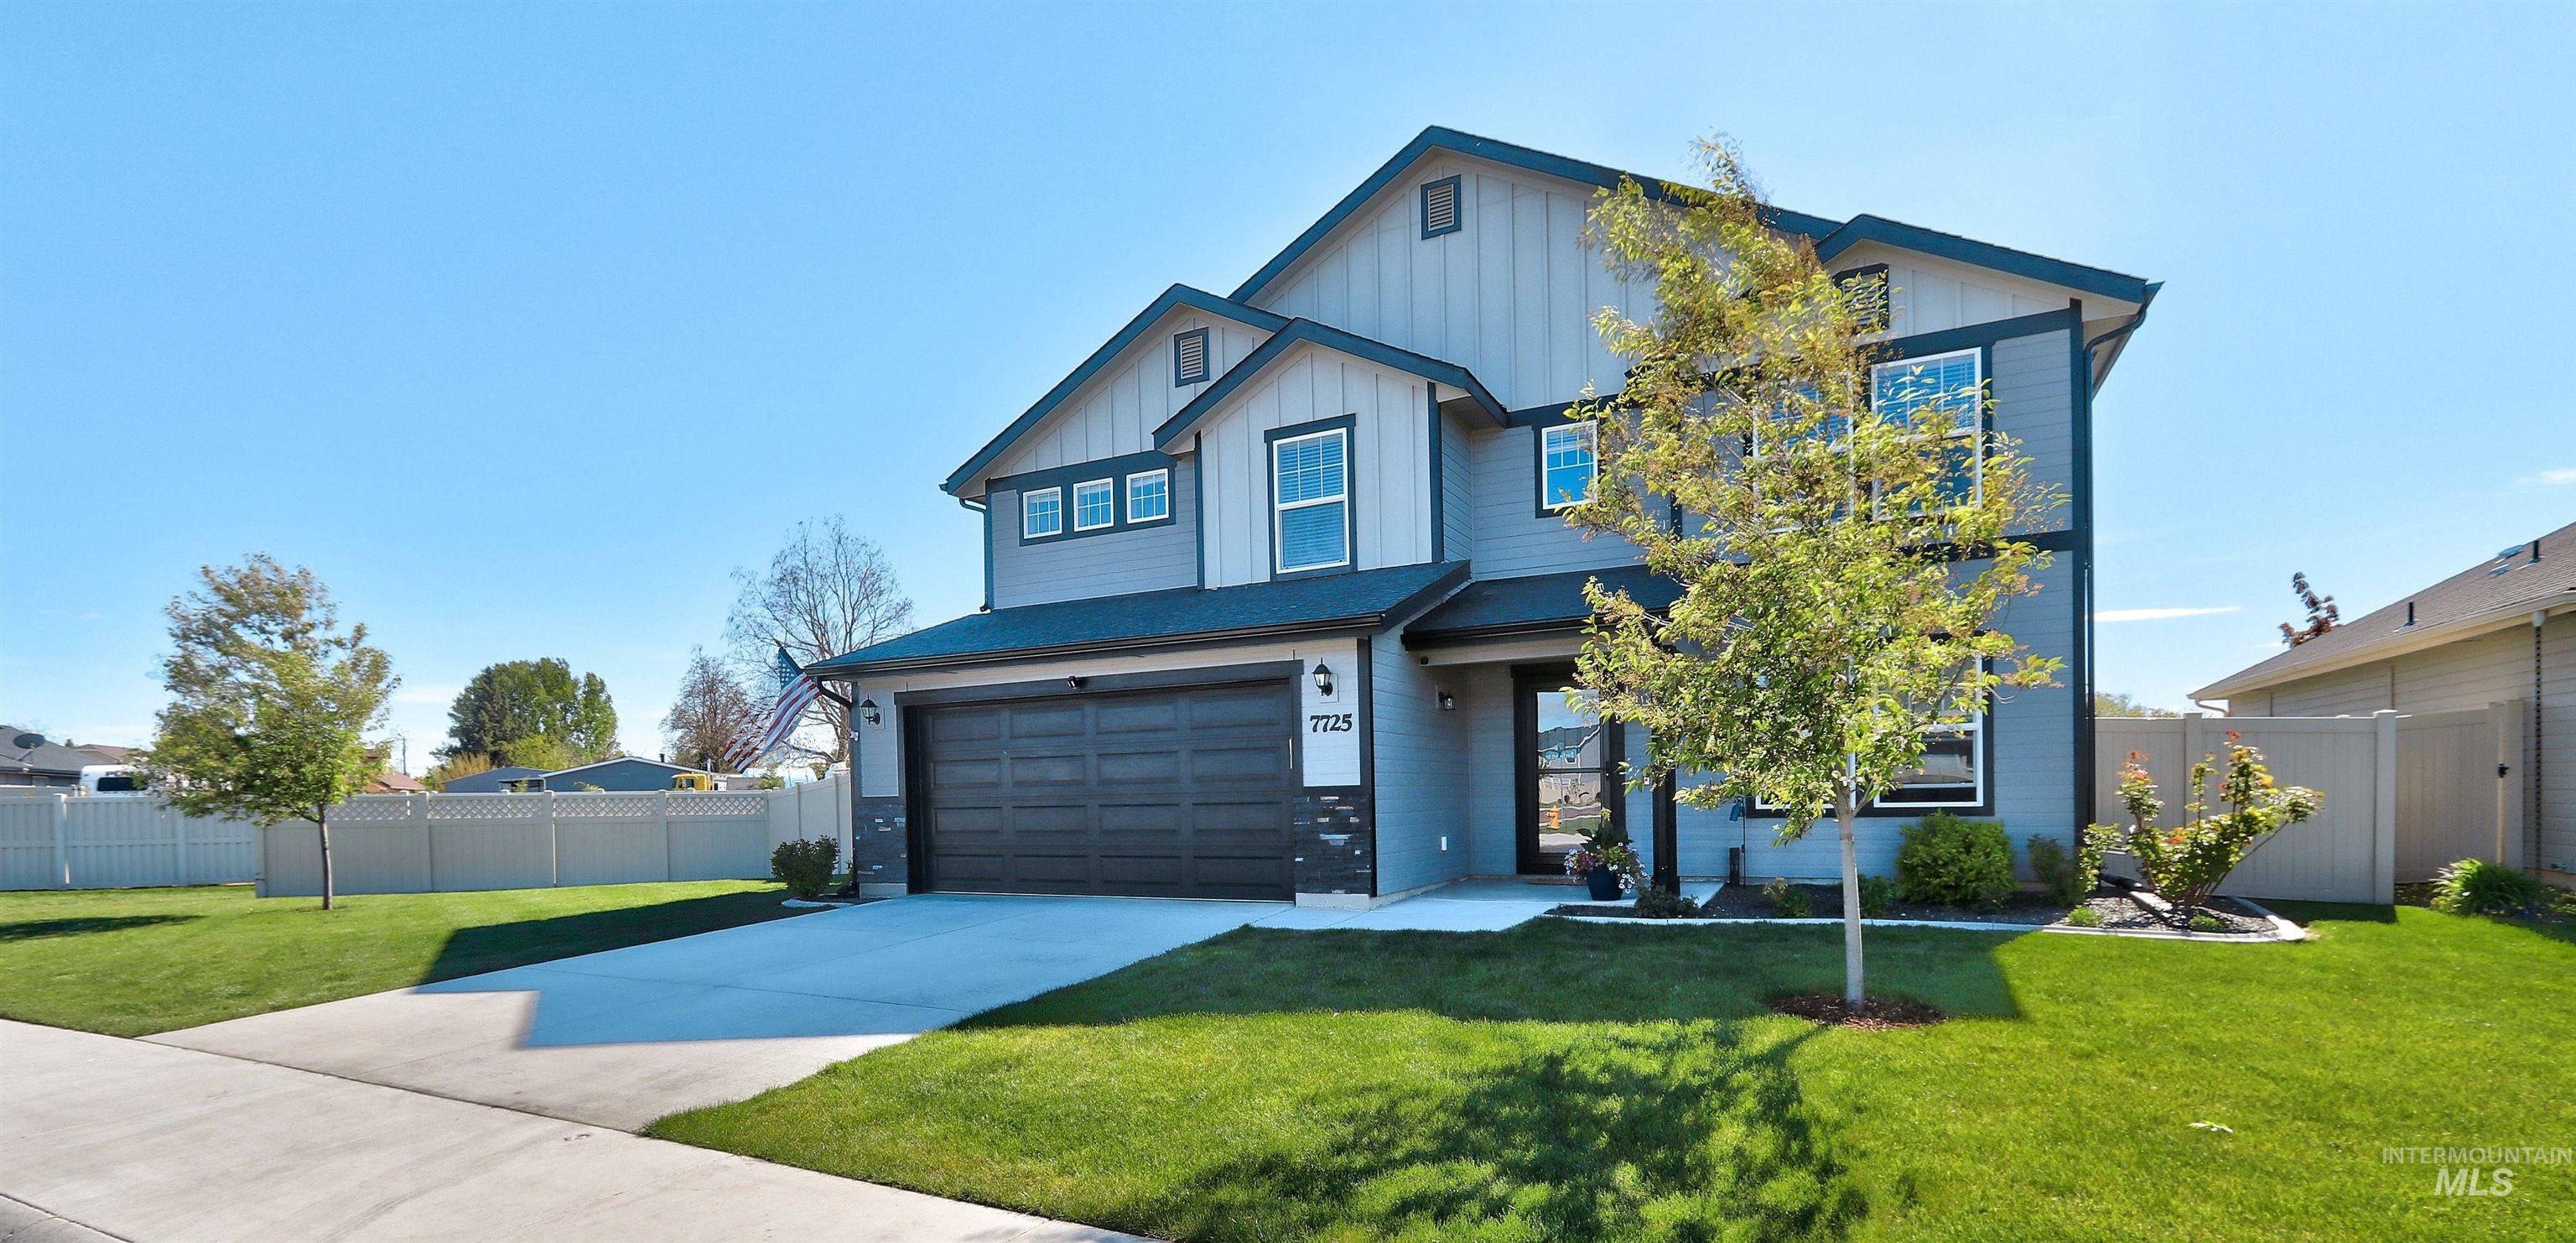 7725 E Declaration, Nampa, Idaho 83687, 5 Bedrooms, 2.5 Bathrooms, Residential For Sale, Price $459,500,MLS 98909704